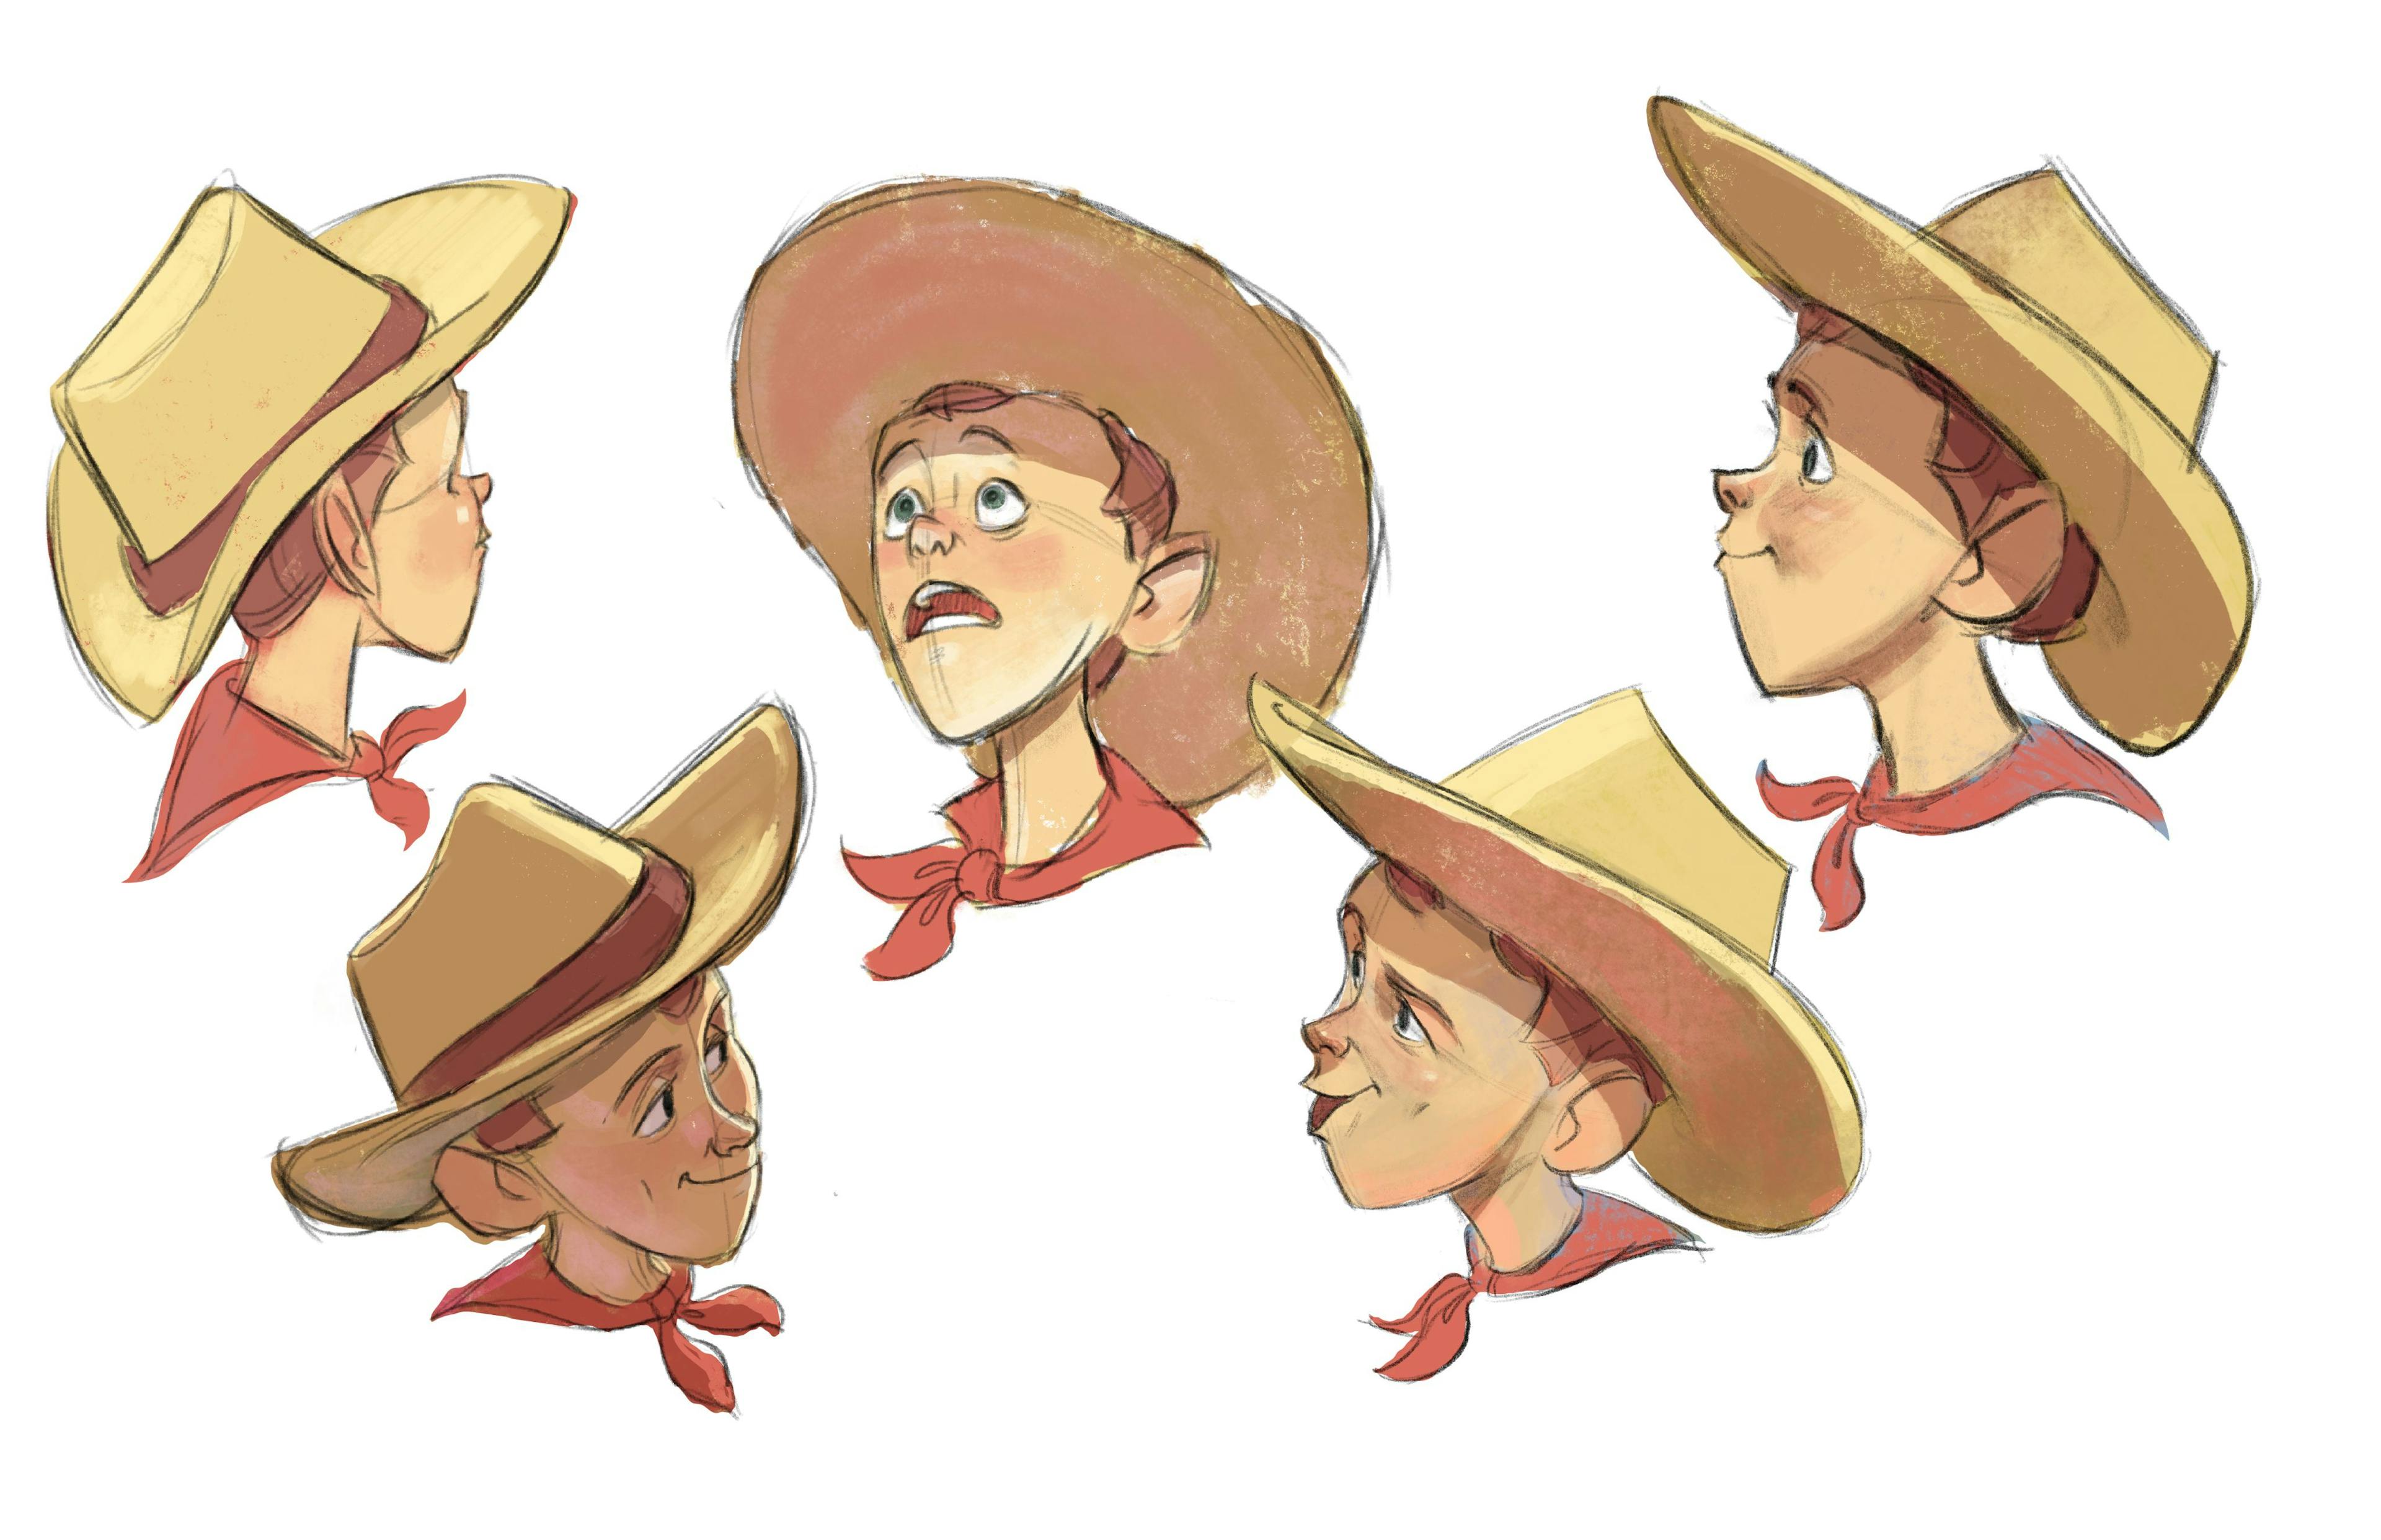 Character study of an old west boy